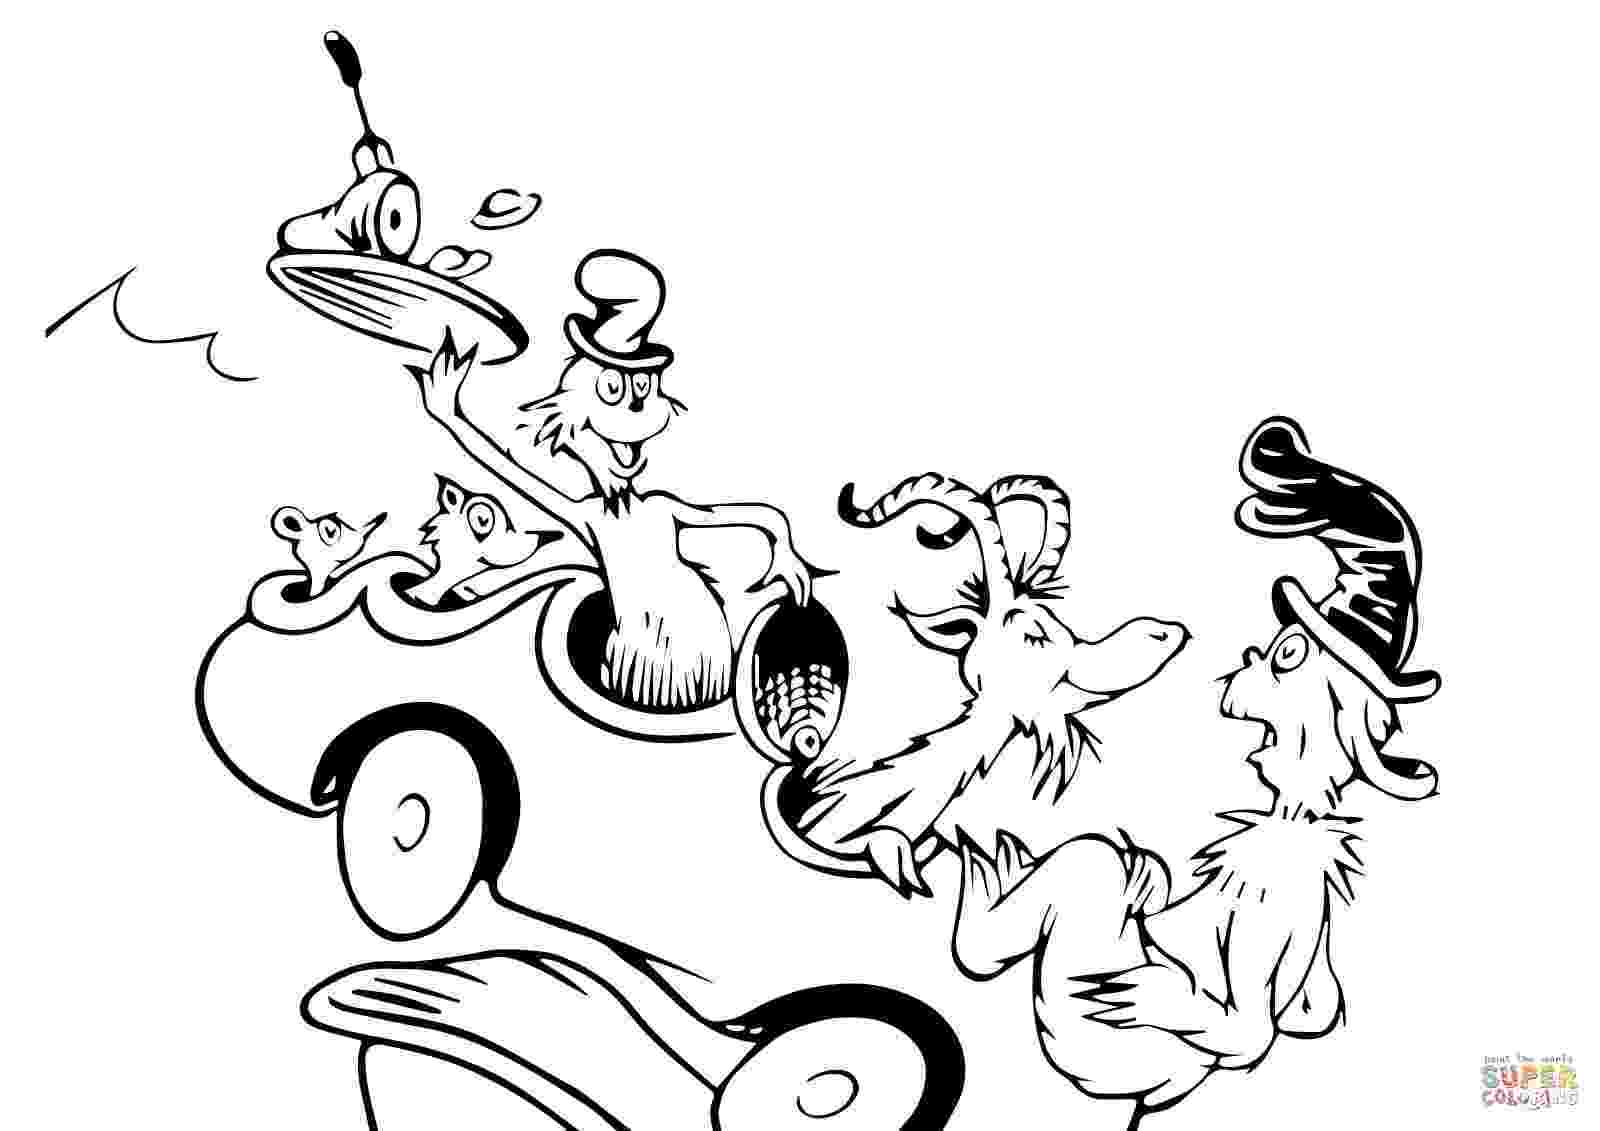 dr seuss coloring pages green eggs and ham green eggs and ham coloring page dr seuss pinterest coloring green seuss pages and dr ham eggs 